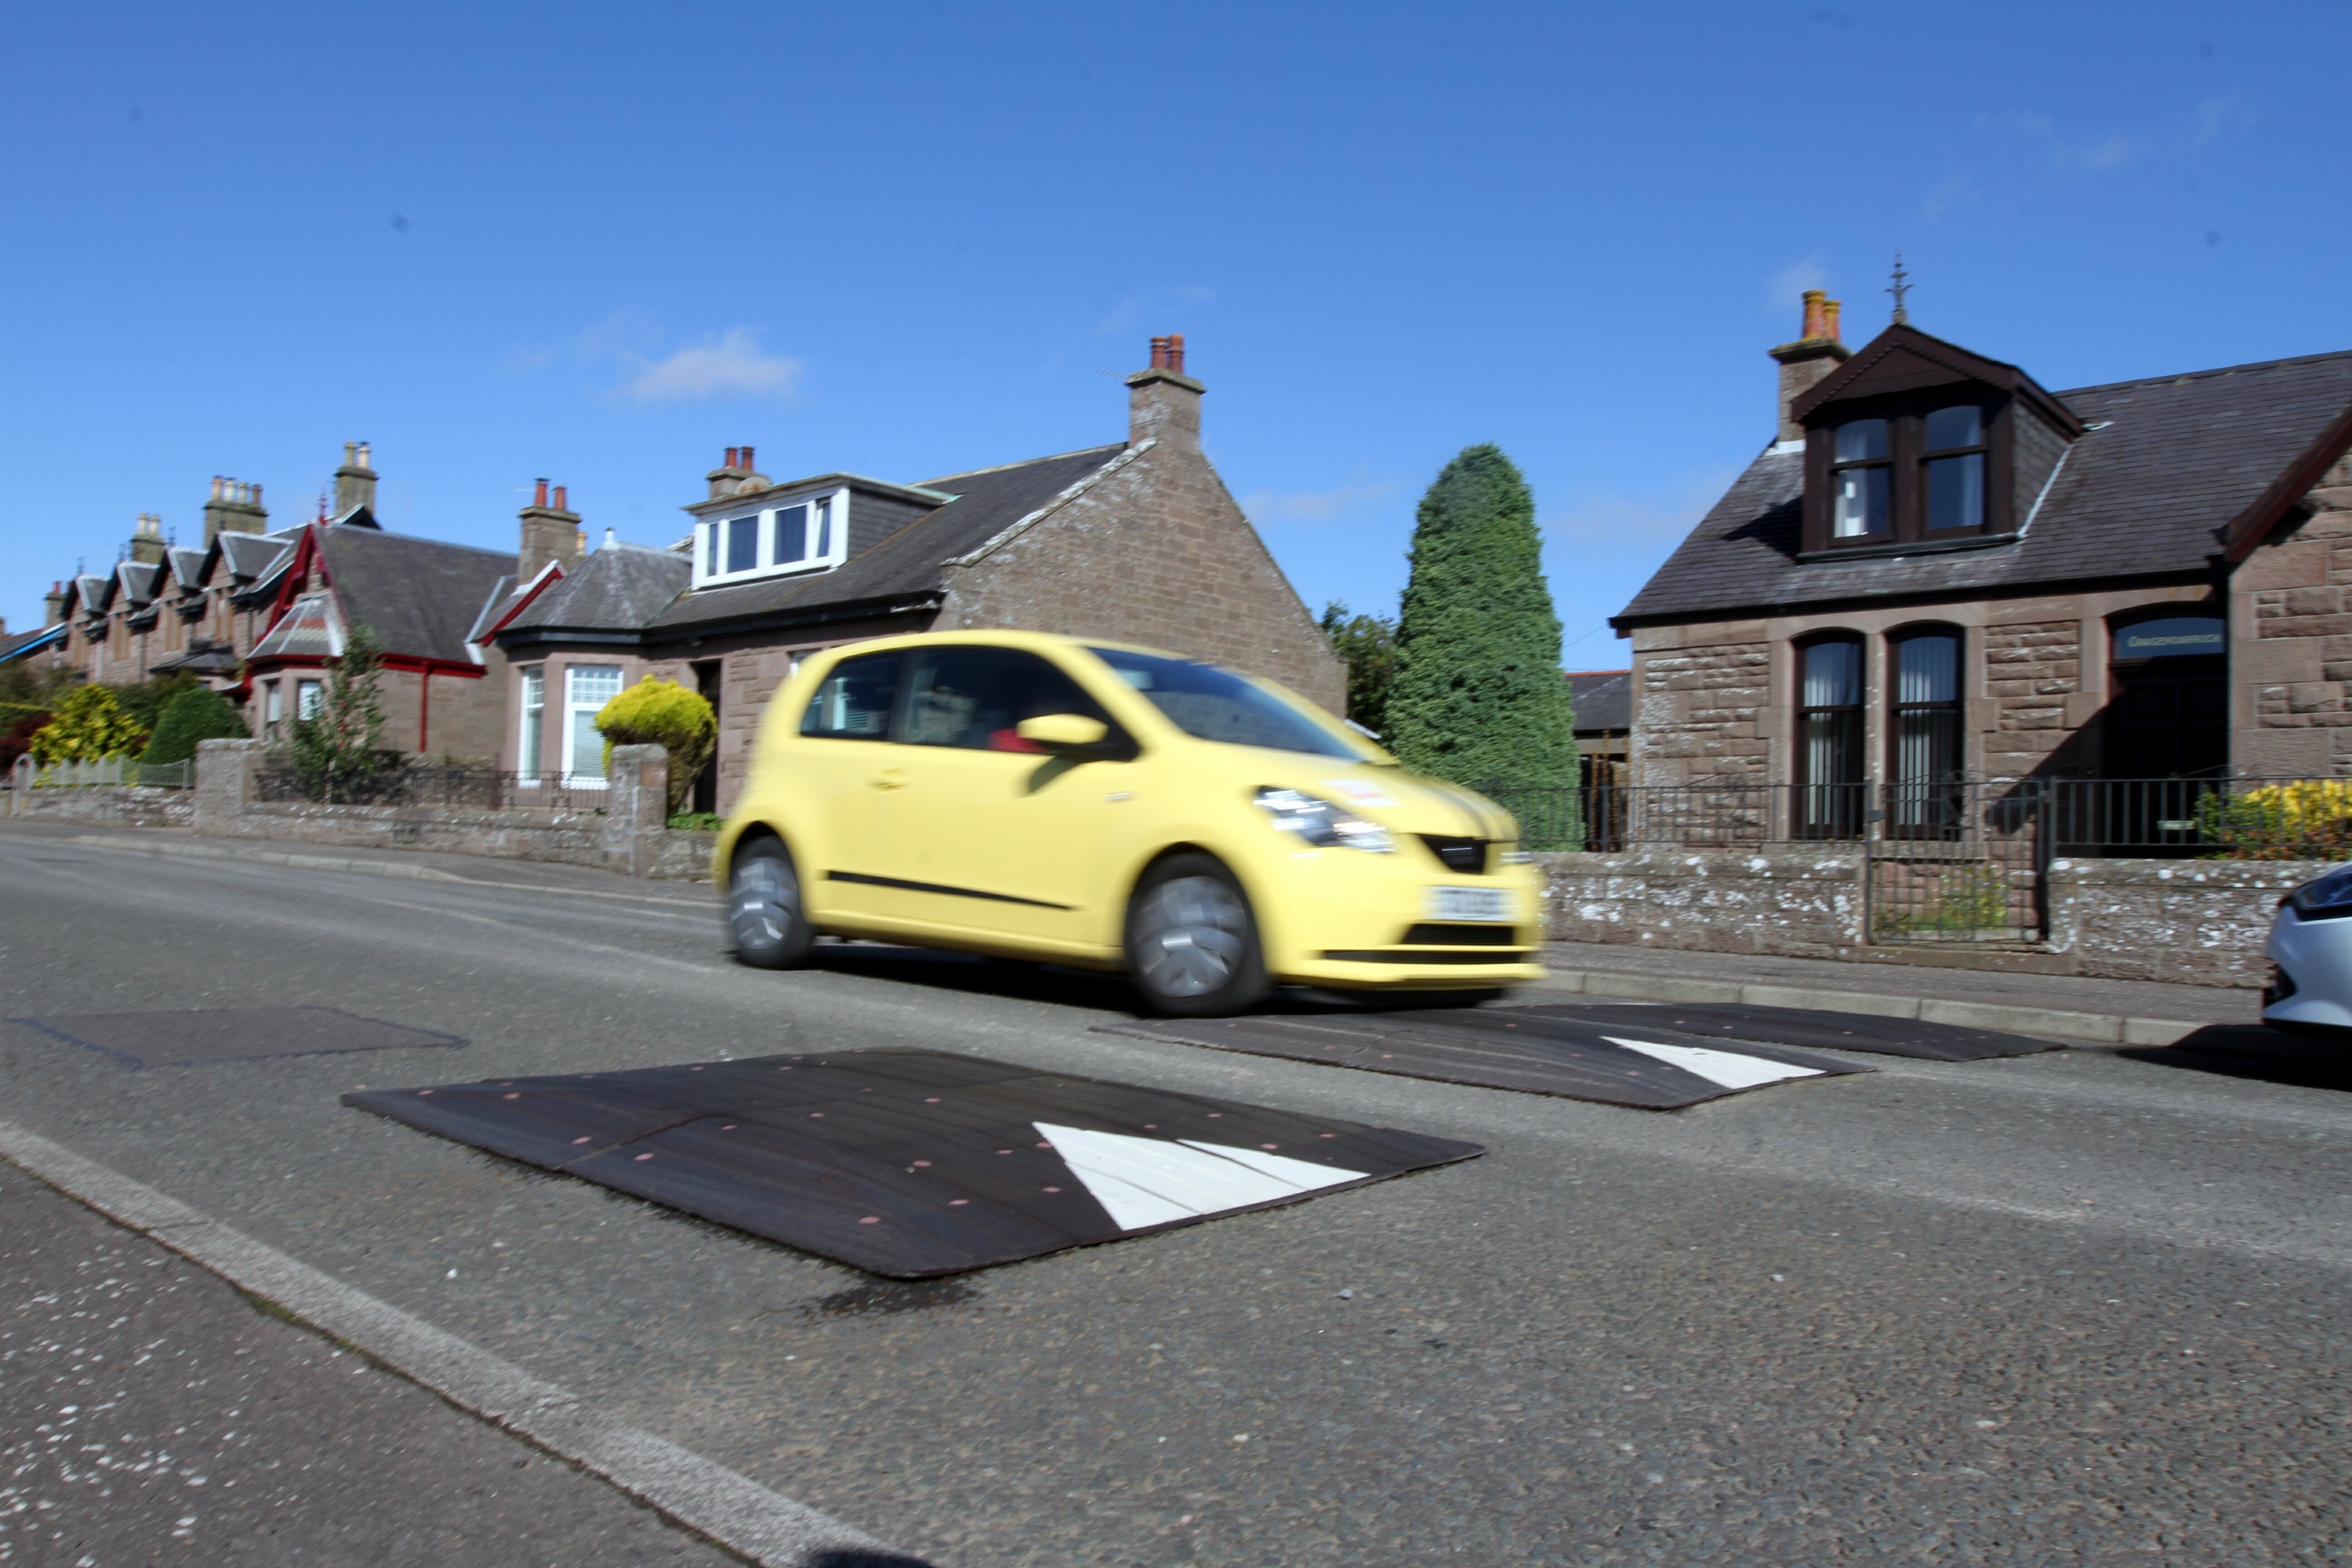 Speed humps will stay in Taylor Street